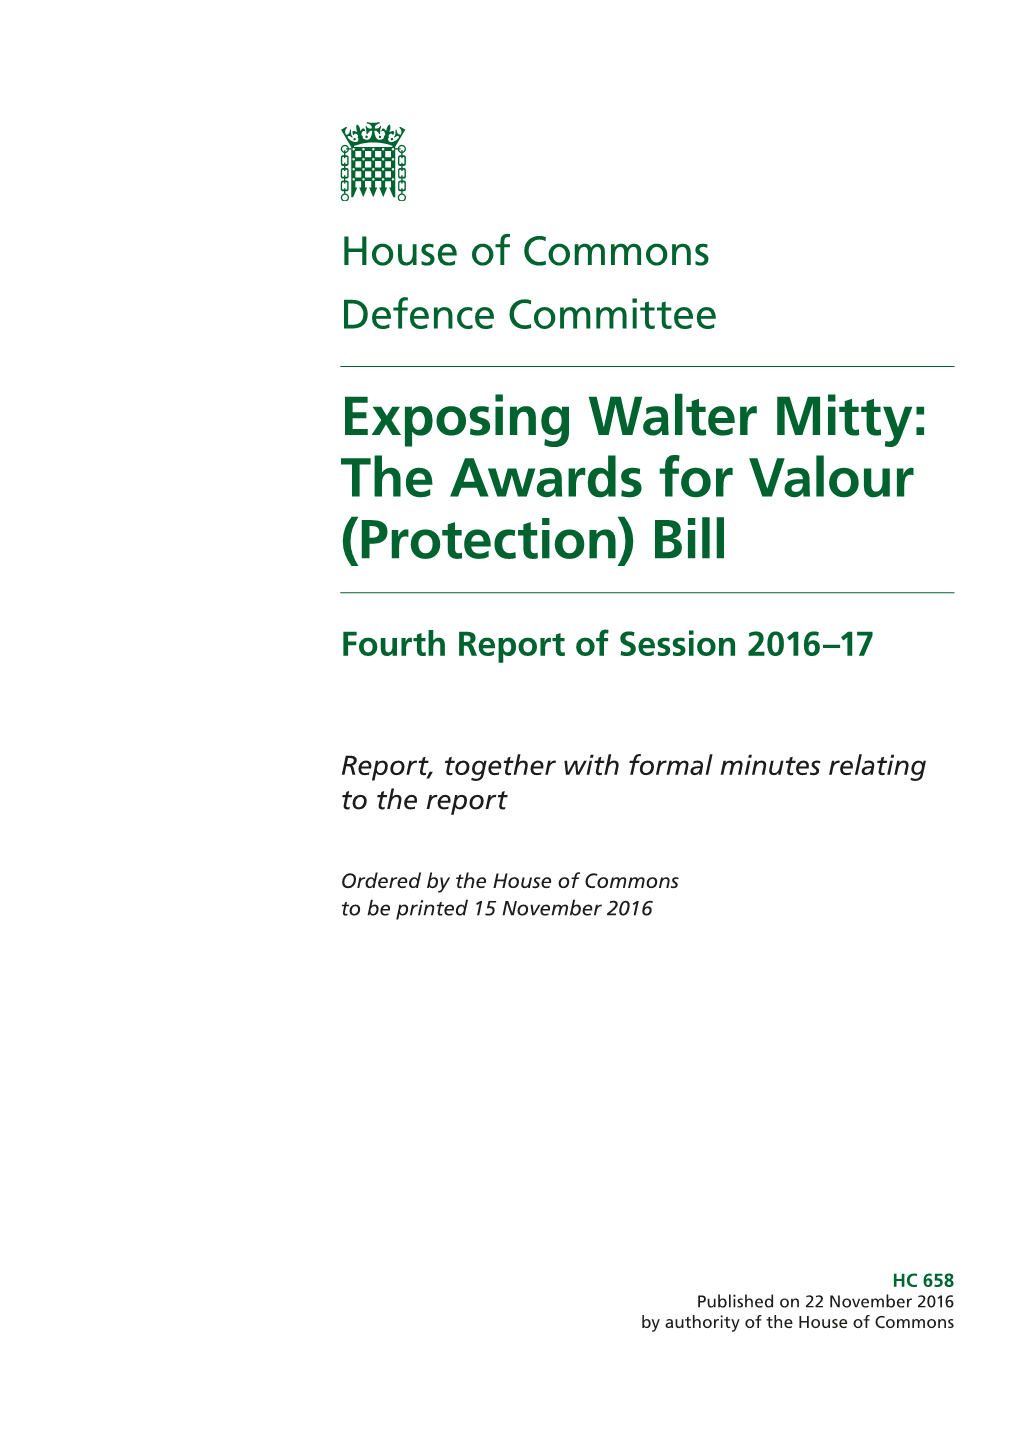 Exposing Walter Mitty: the Awards for Valour (Protection) Bill